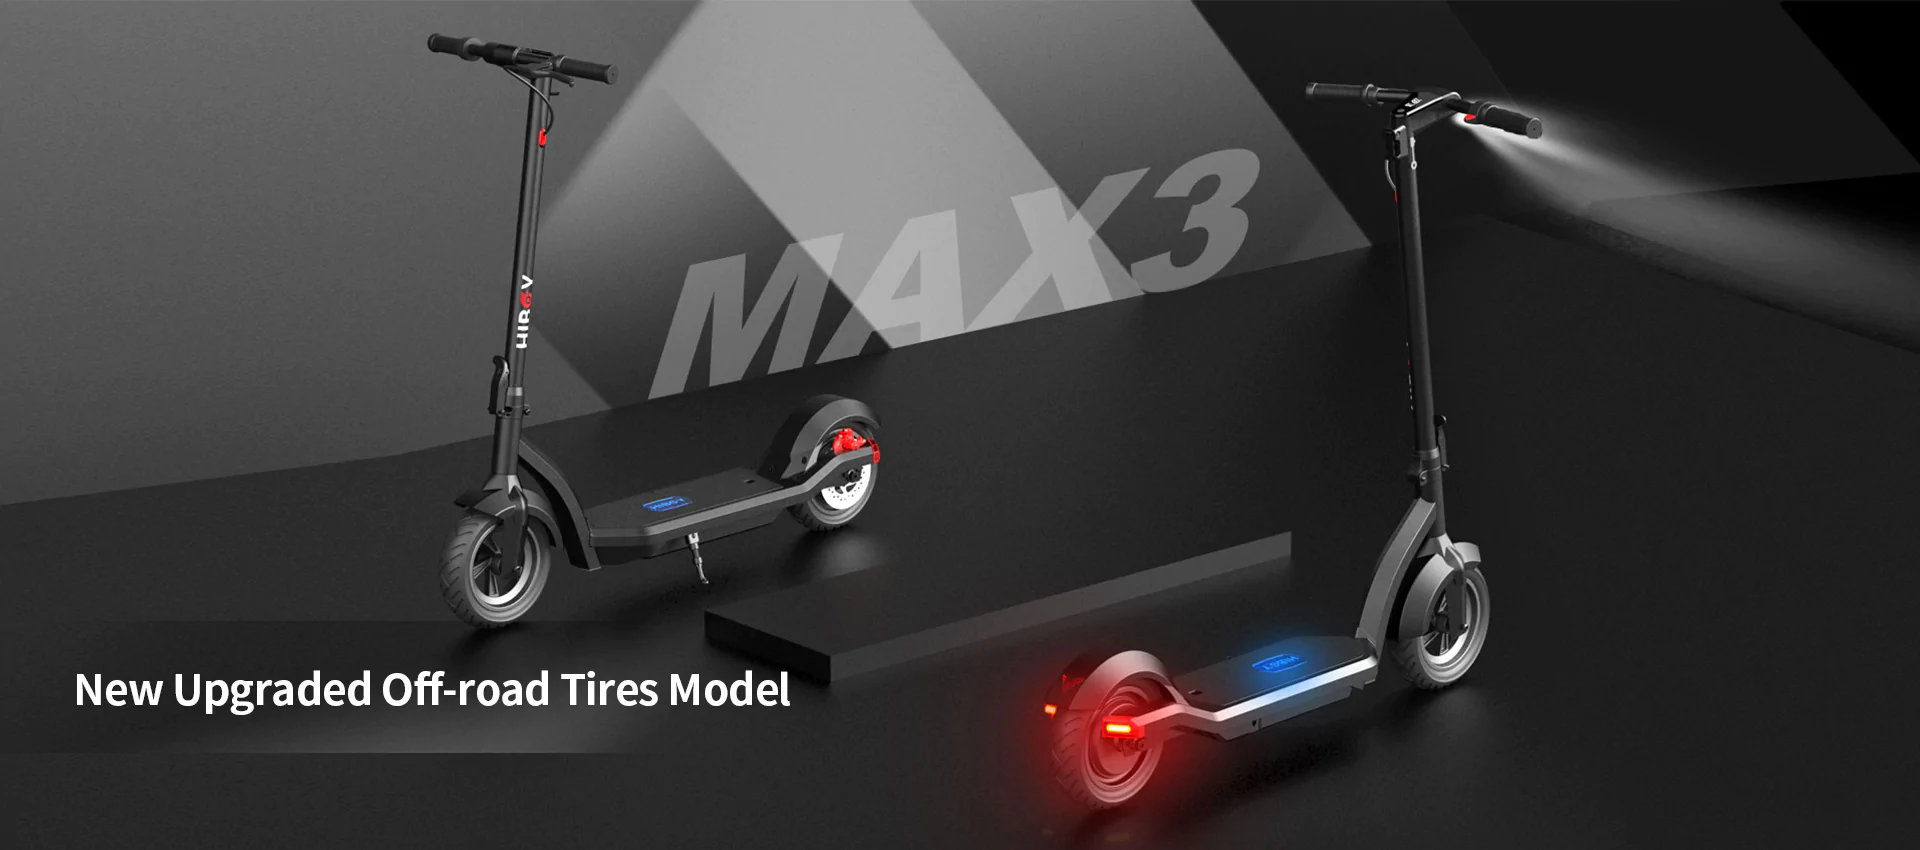 Hiboy MAX3 Electric Scooter off road tires